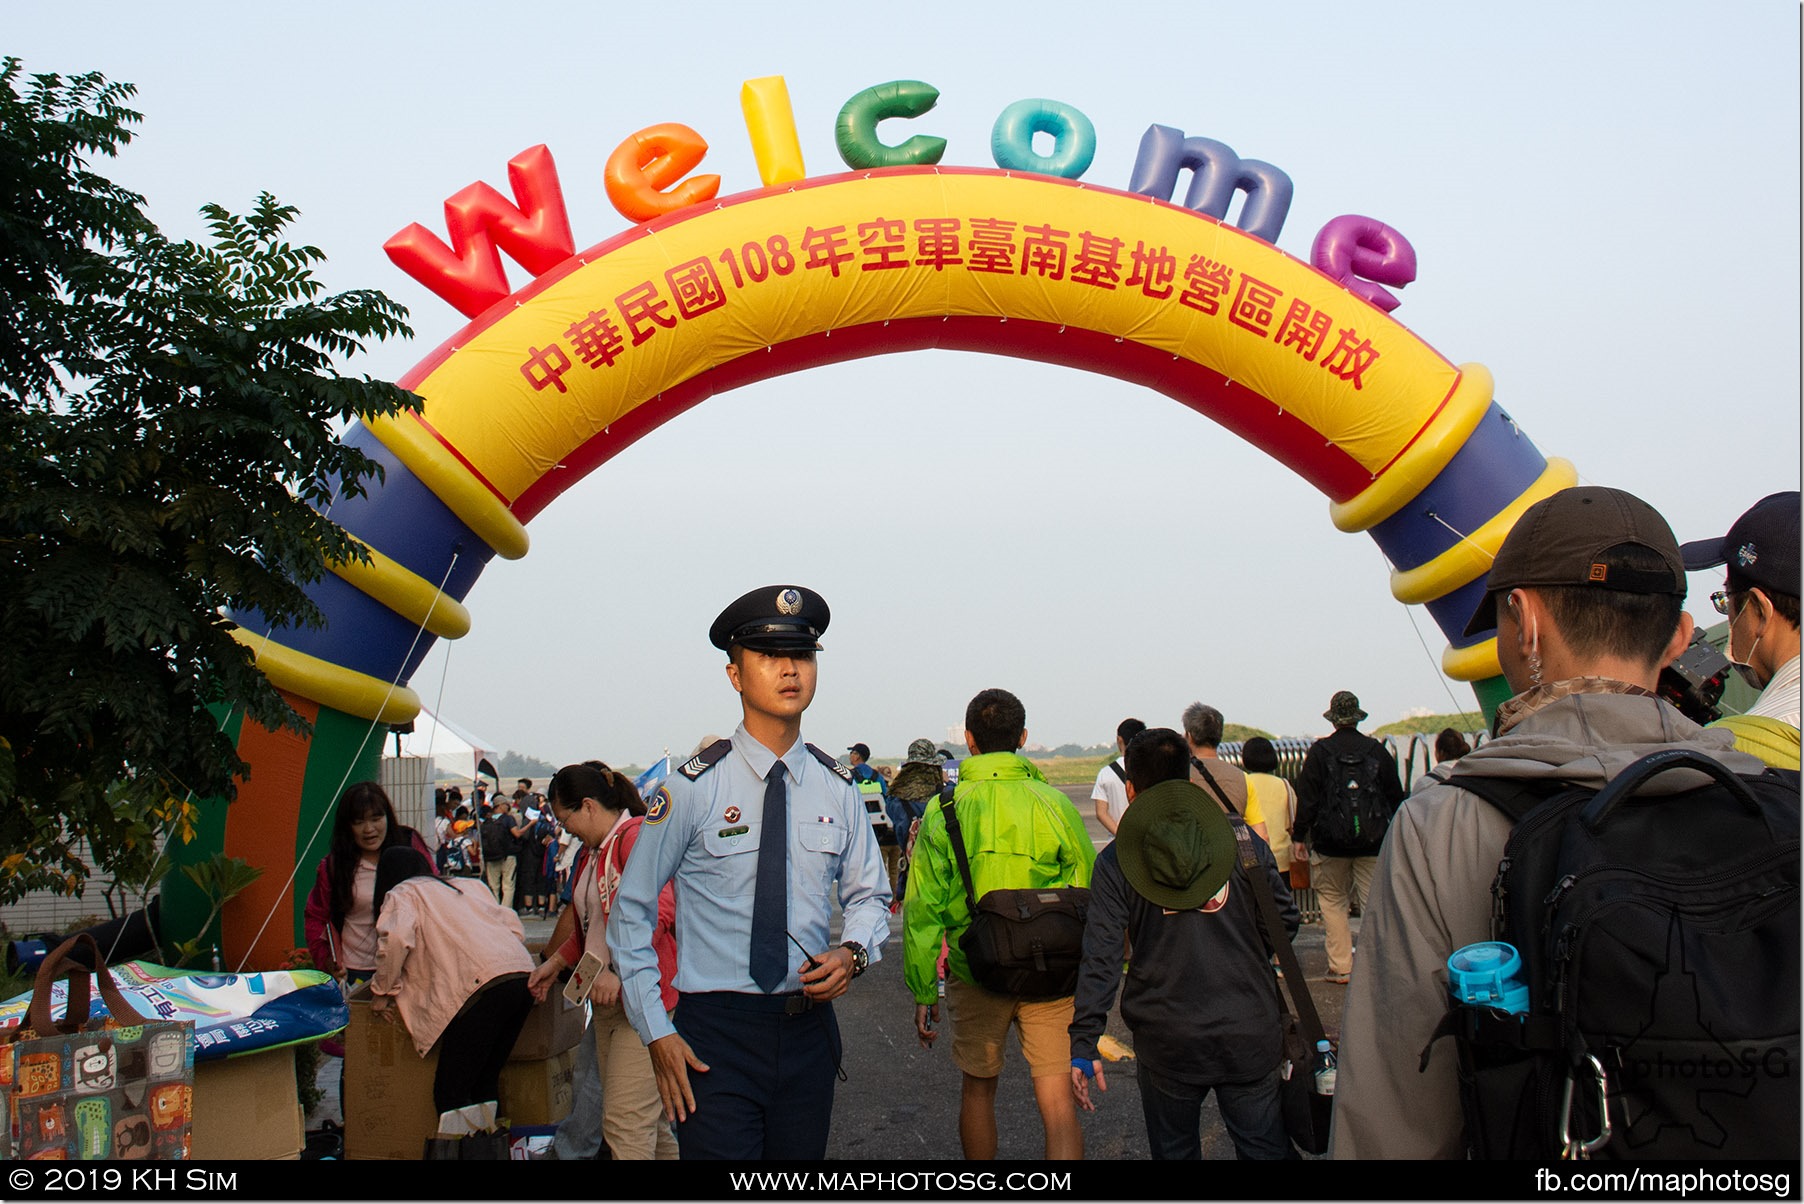 Welcome to the Tainan Air Base Open House